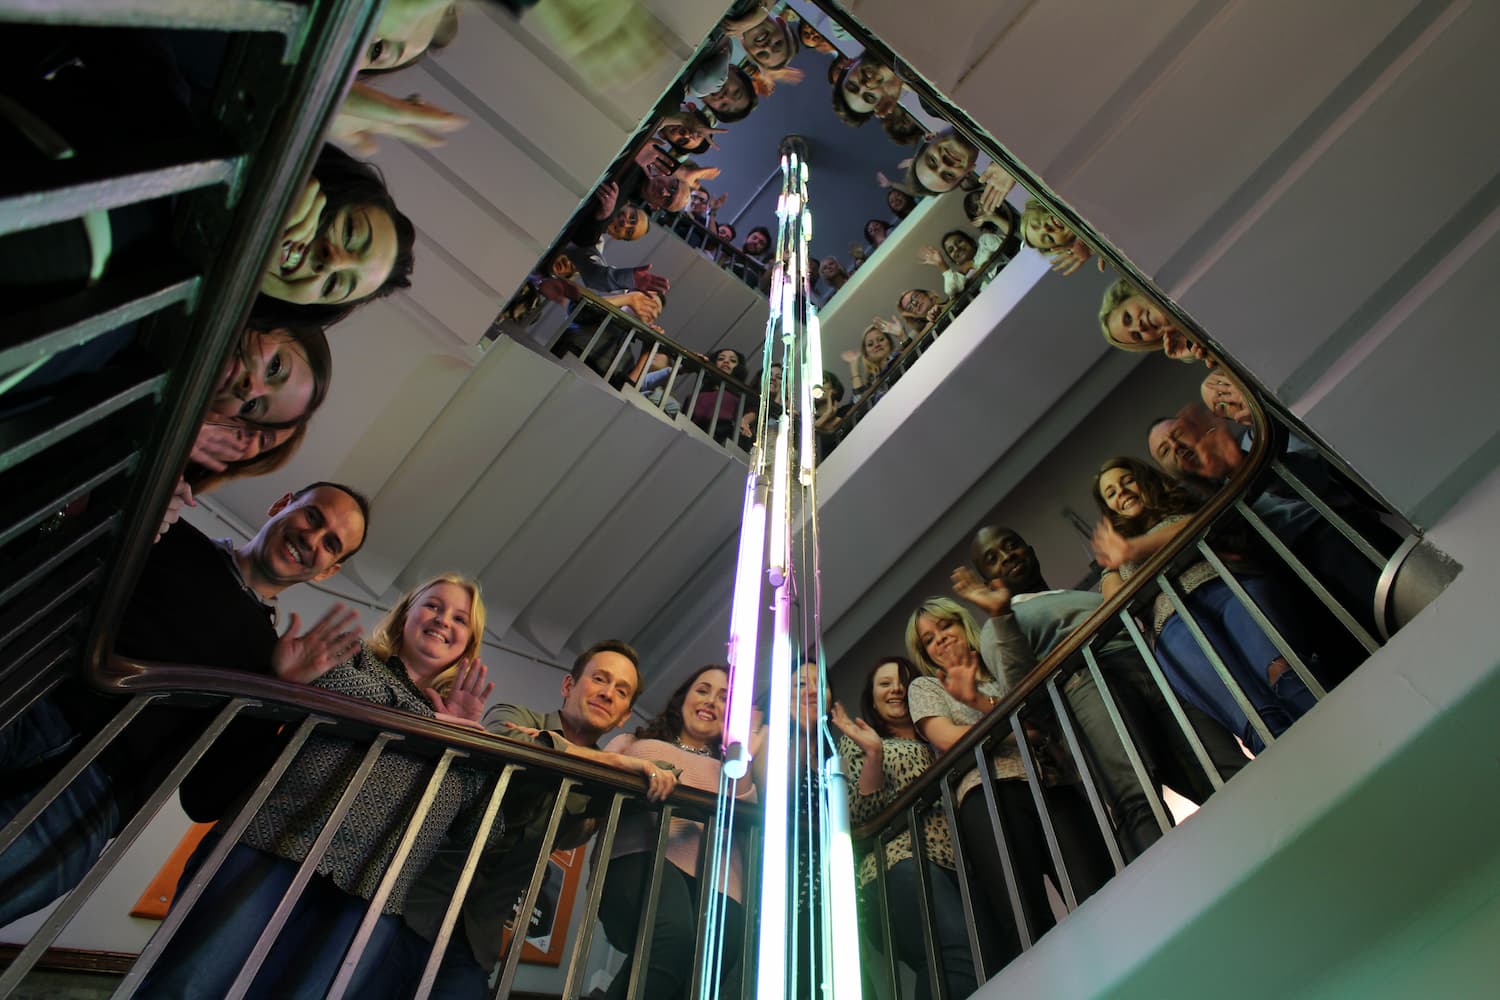 Agency staff gathered on three floors in a stairwell for a group shot, smiling and waving